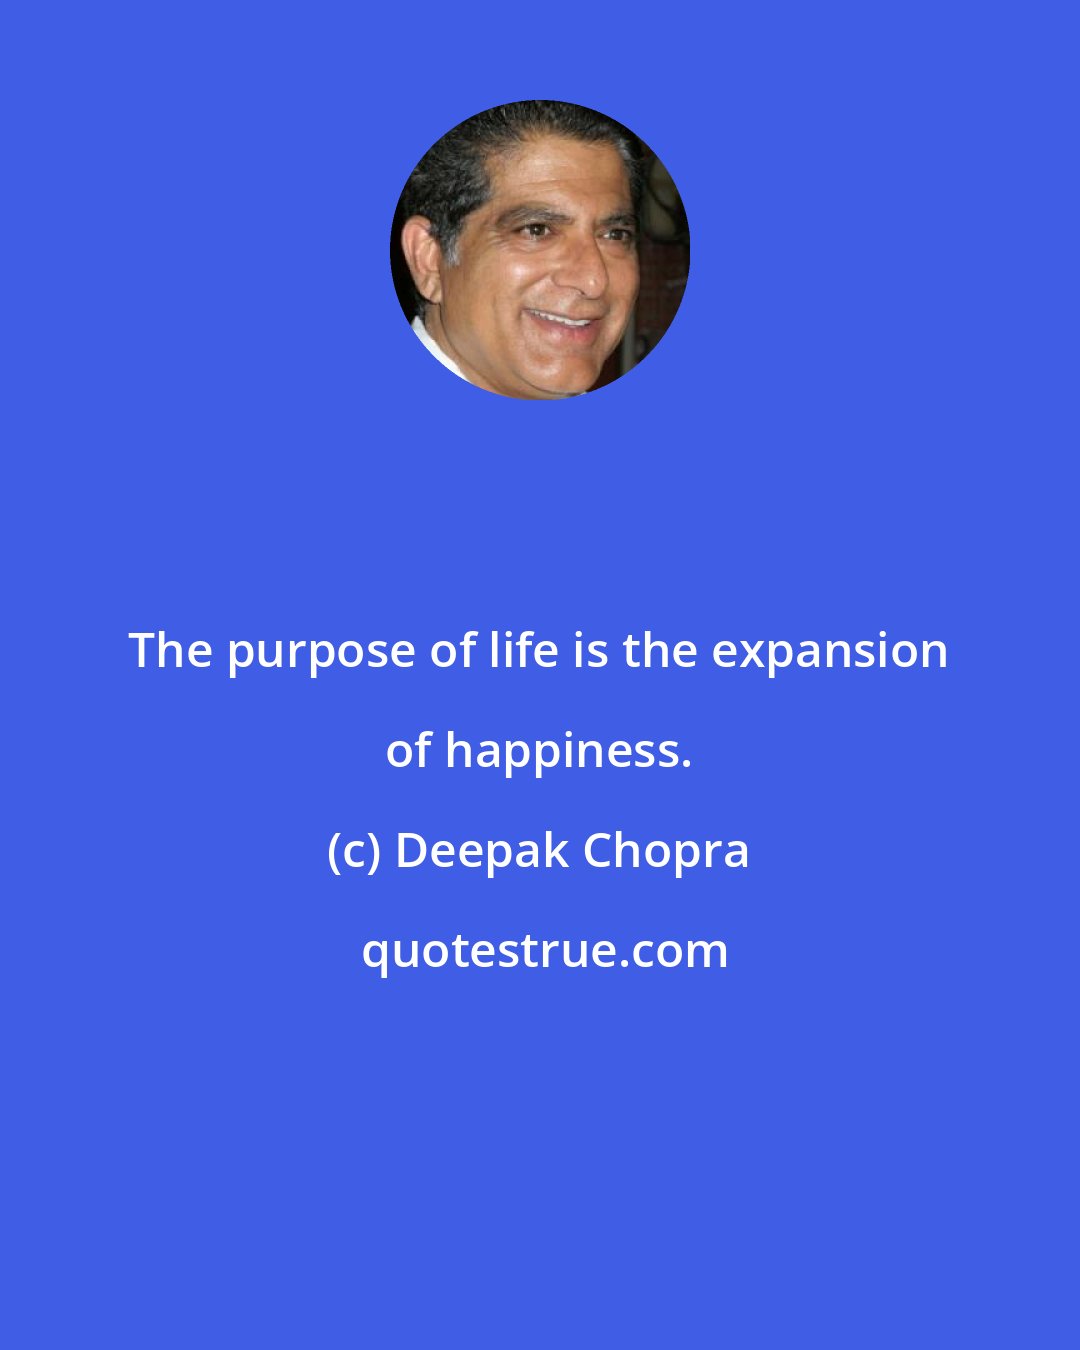 Deepak Chopra: The purpose of life is the expansion of happiness.